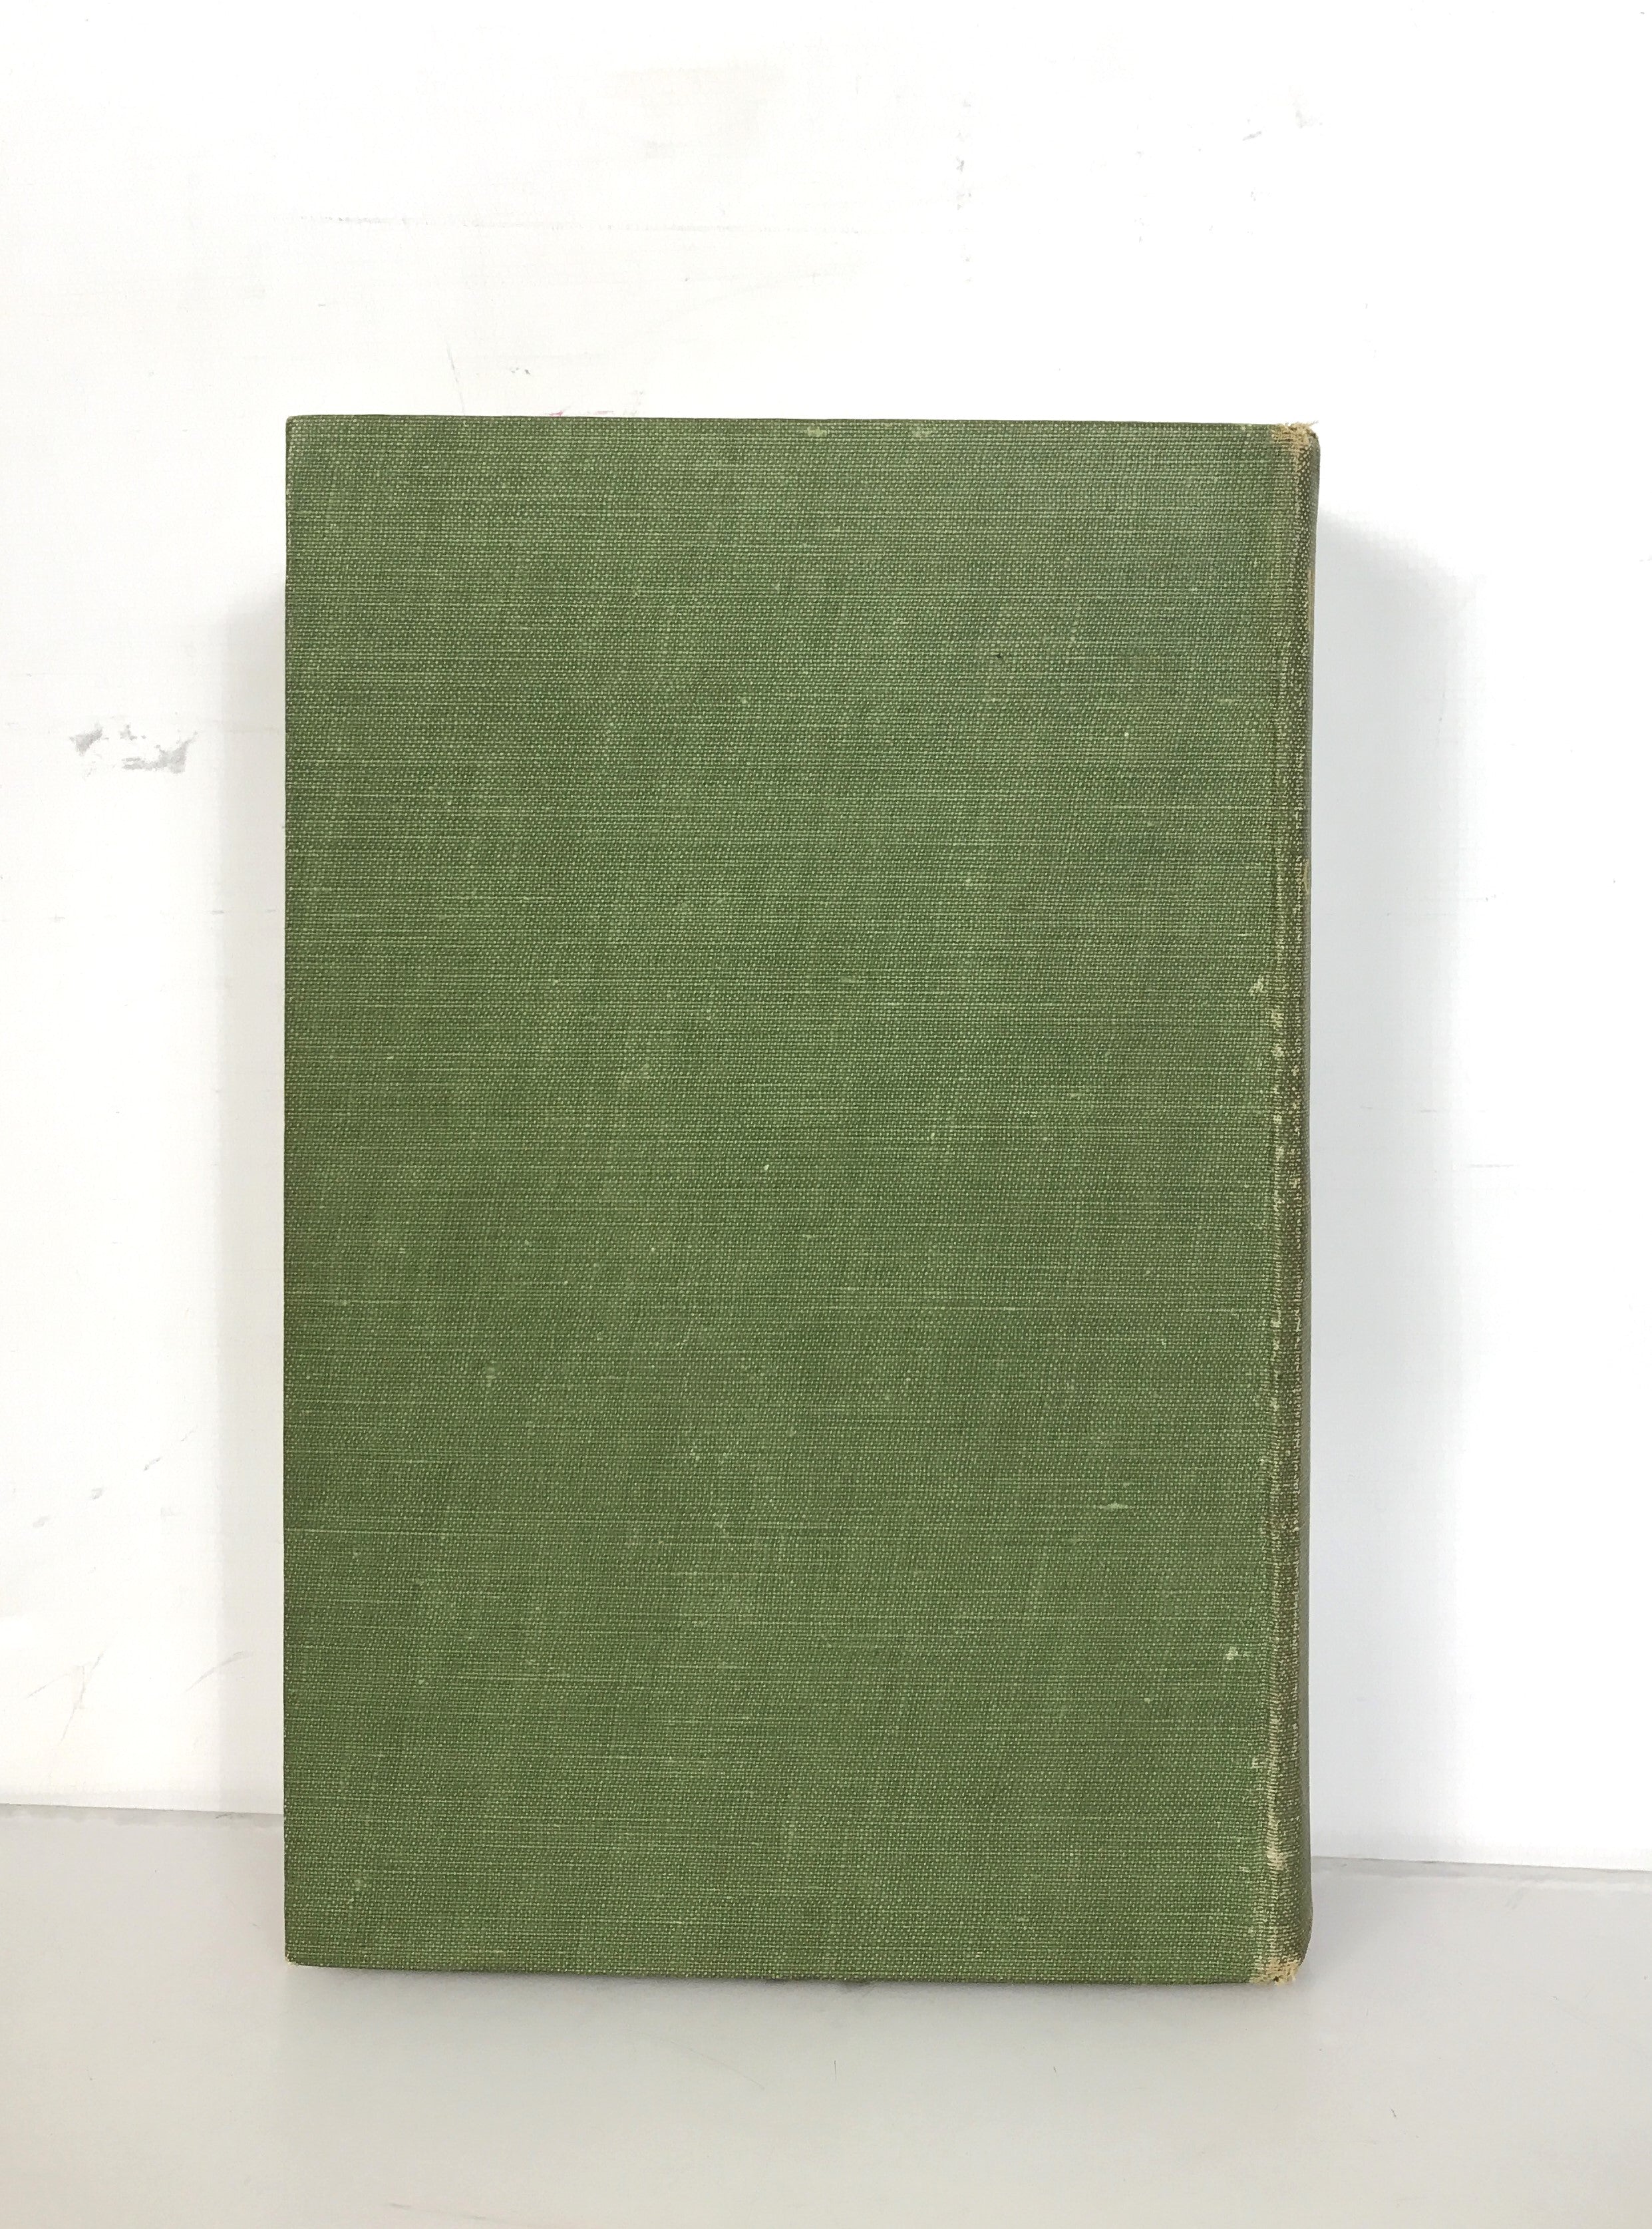 Insect Life an Introduction to Nature-Study by J.H. Comstock 1910 HC